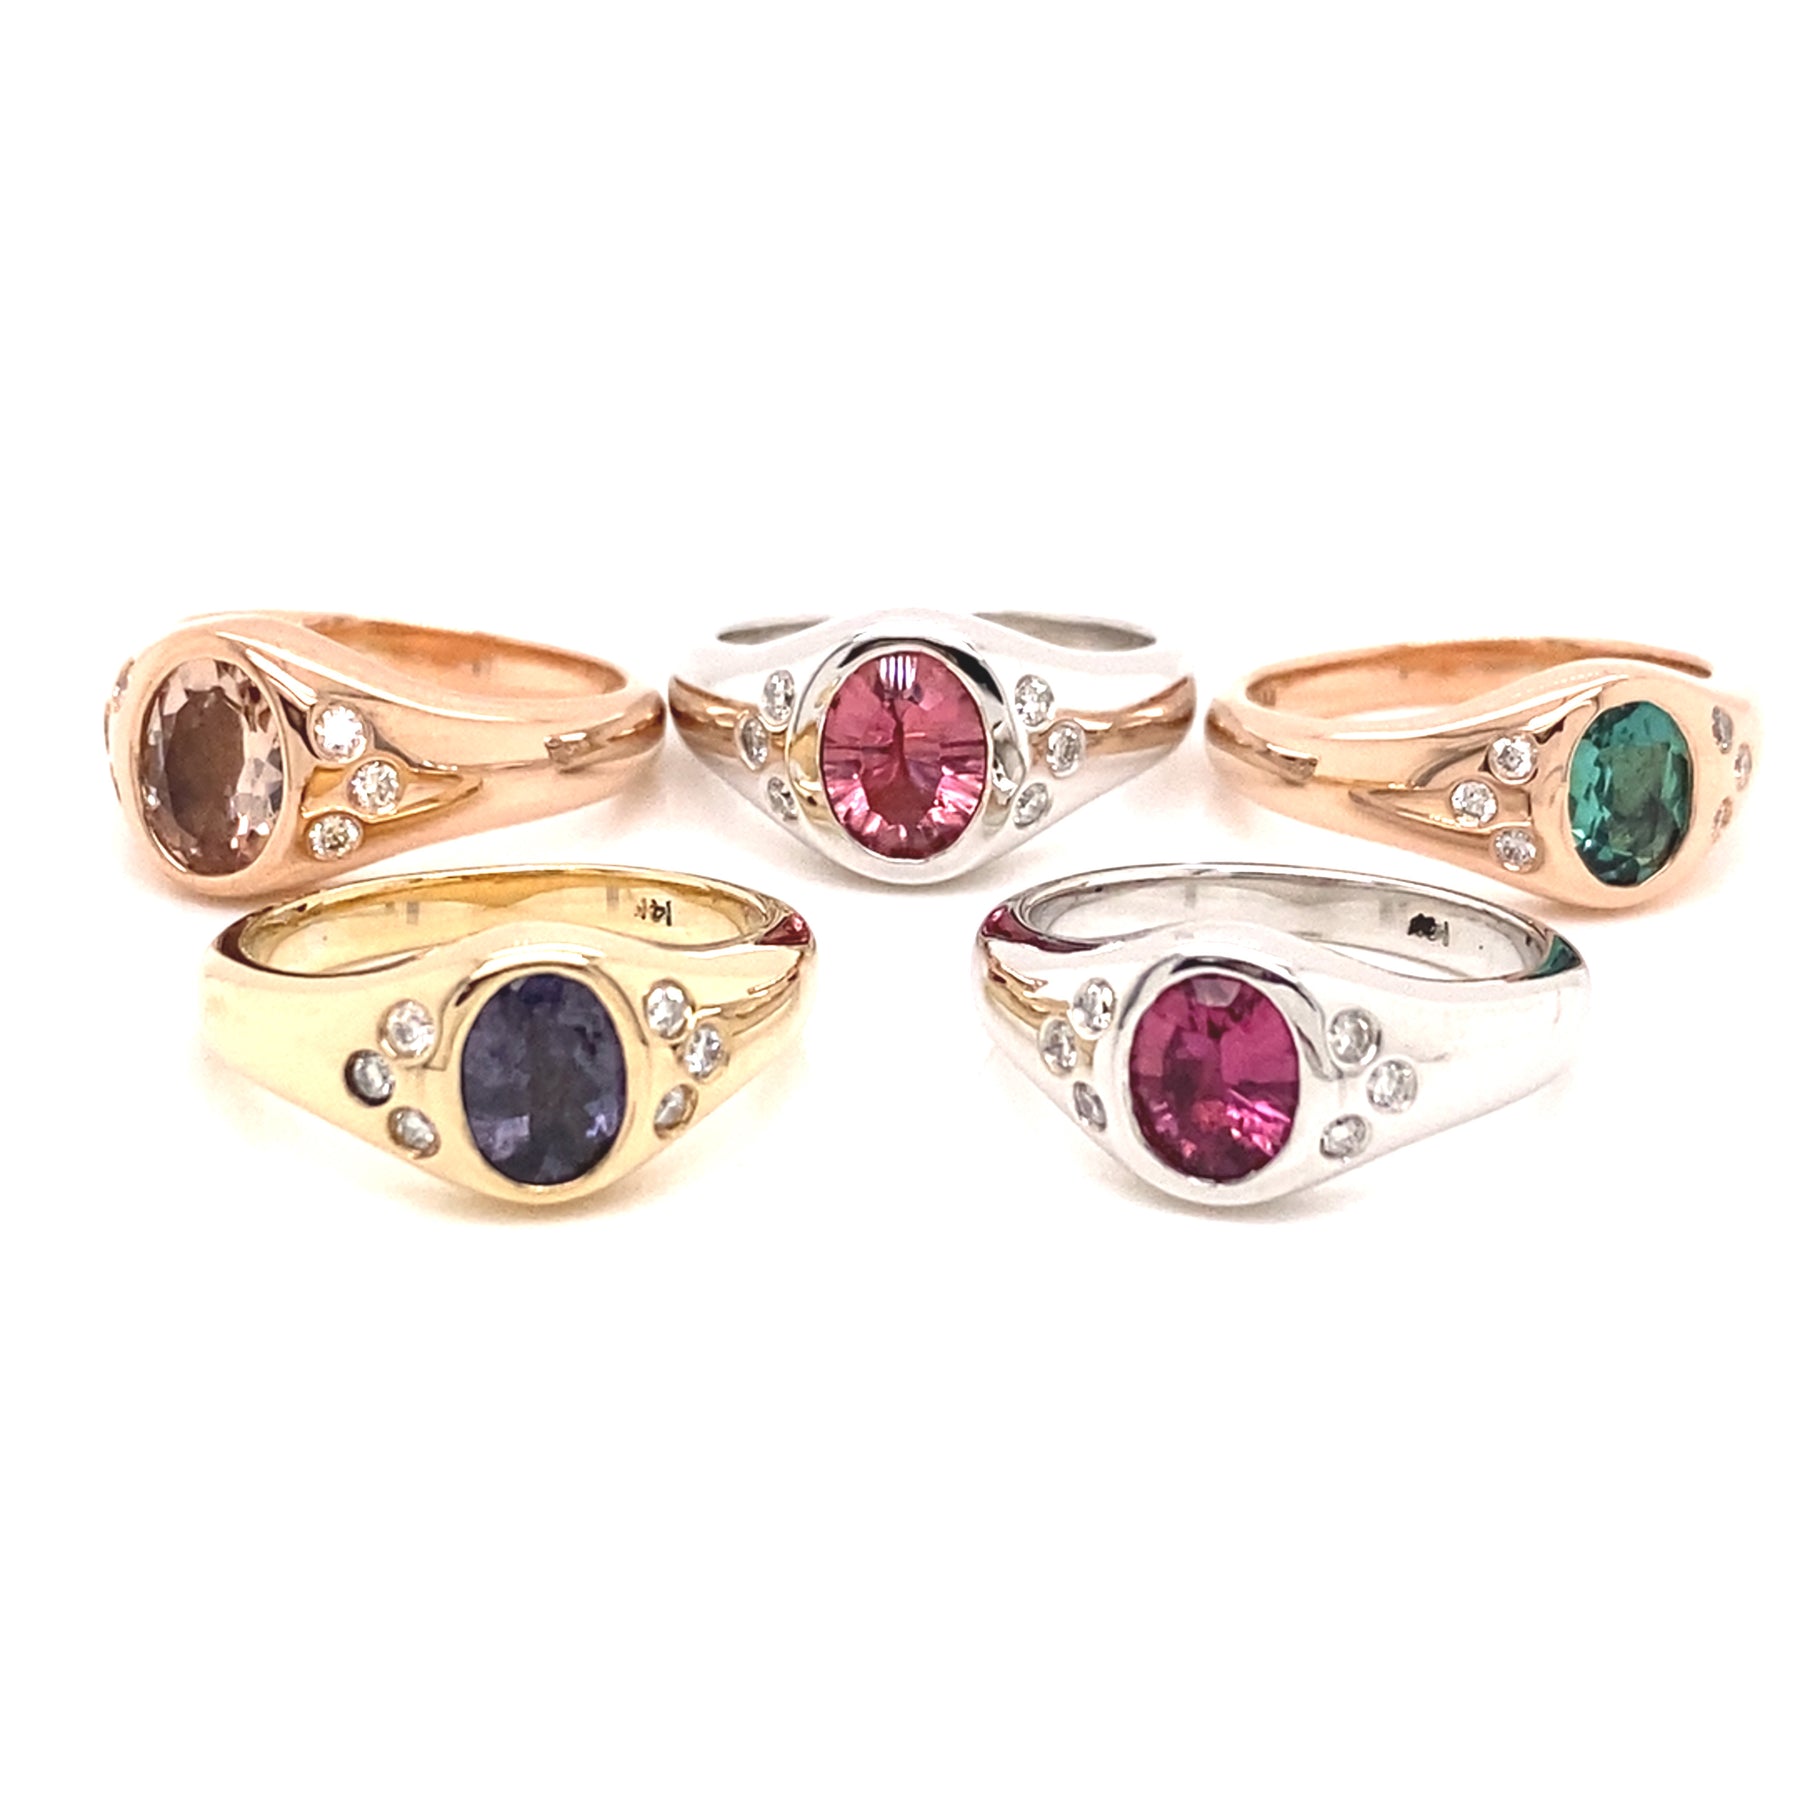 Modern Signet Rings with colored gems and diamonds